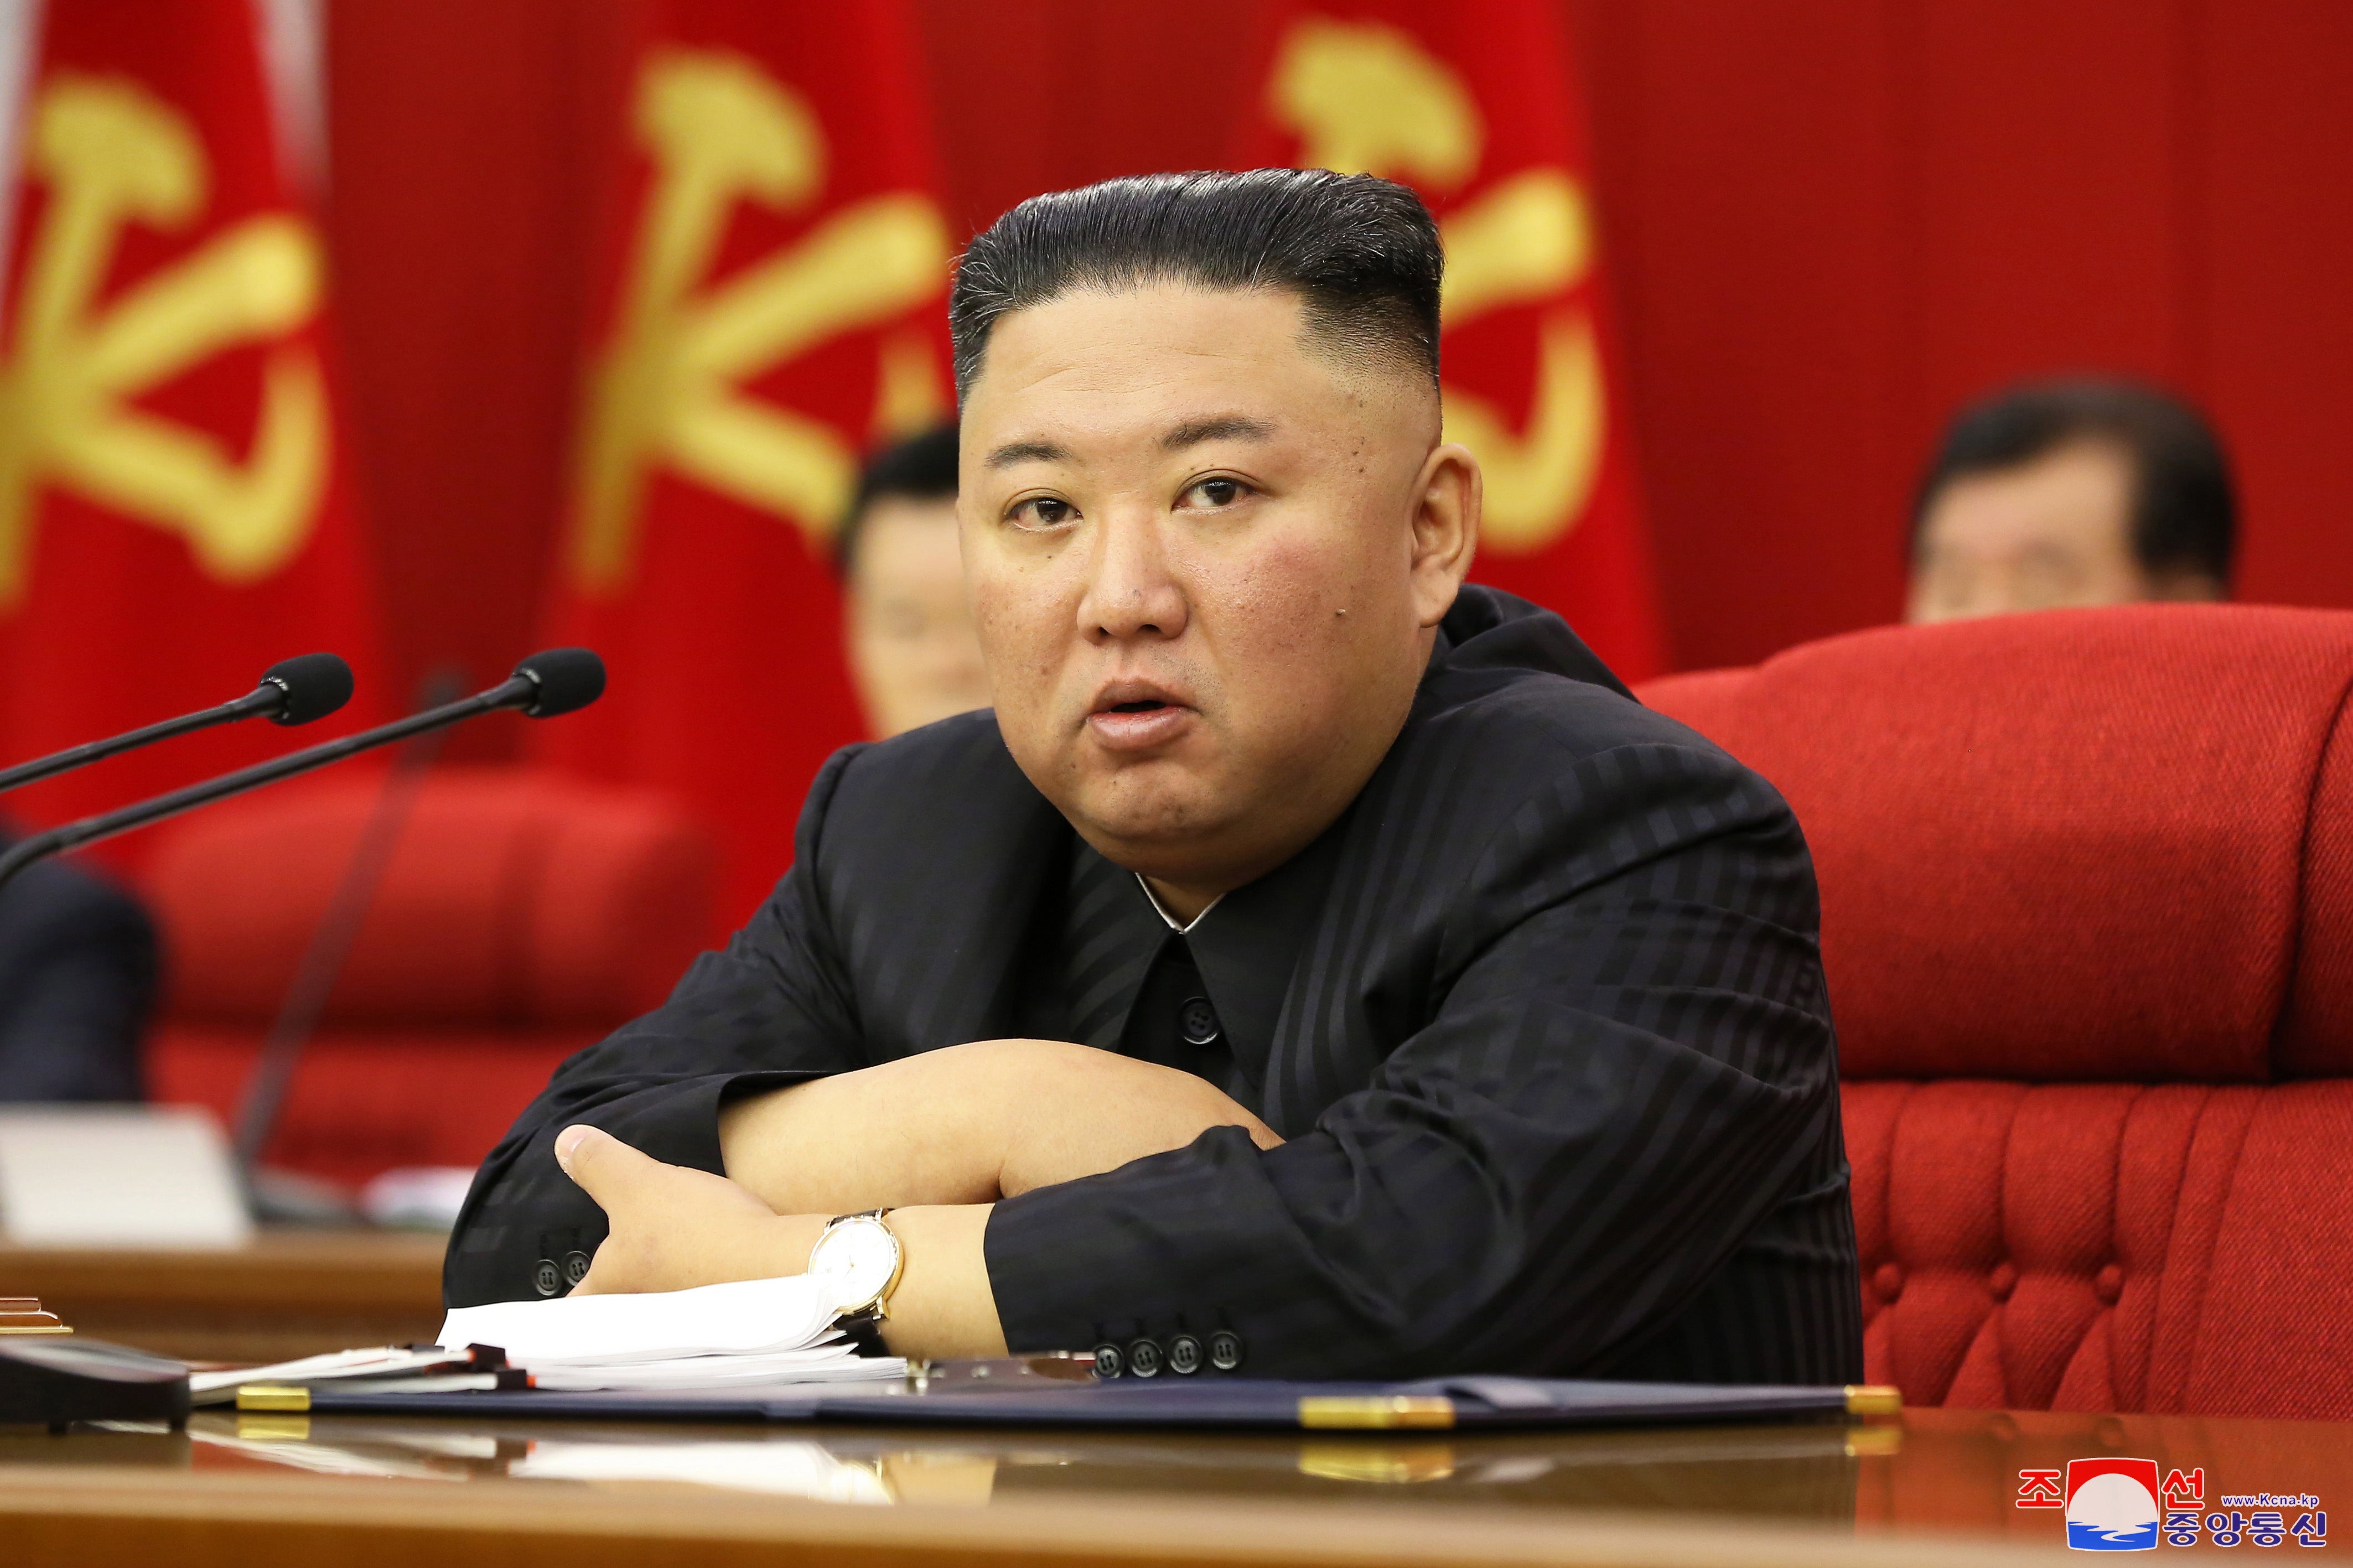 <p>File: A photo released by the official North Korean Central News Agency (KCNA) shows Kim Jong-un presiding over a meeting in Pyongyang, North Korea on 18 June 2021</p>